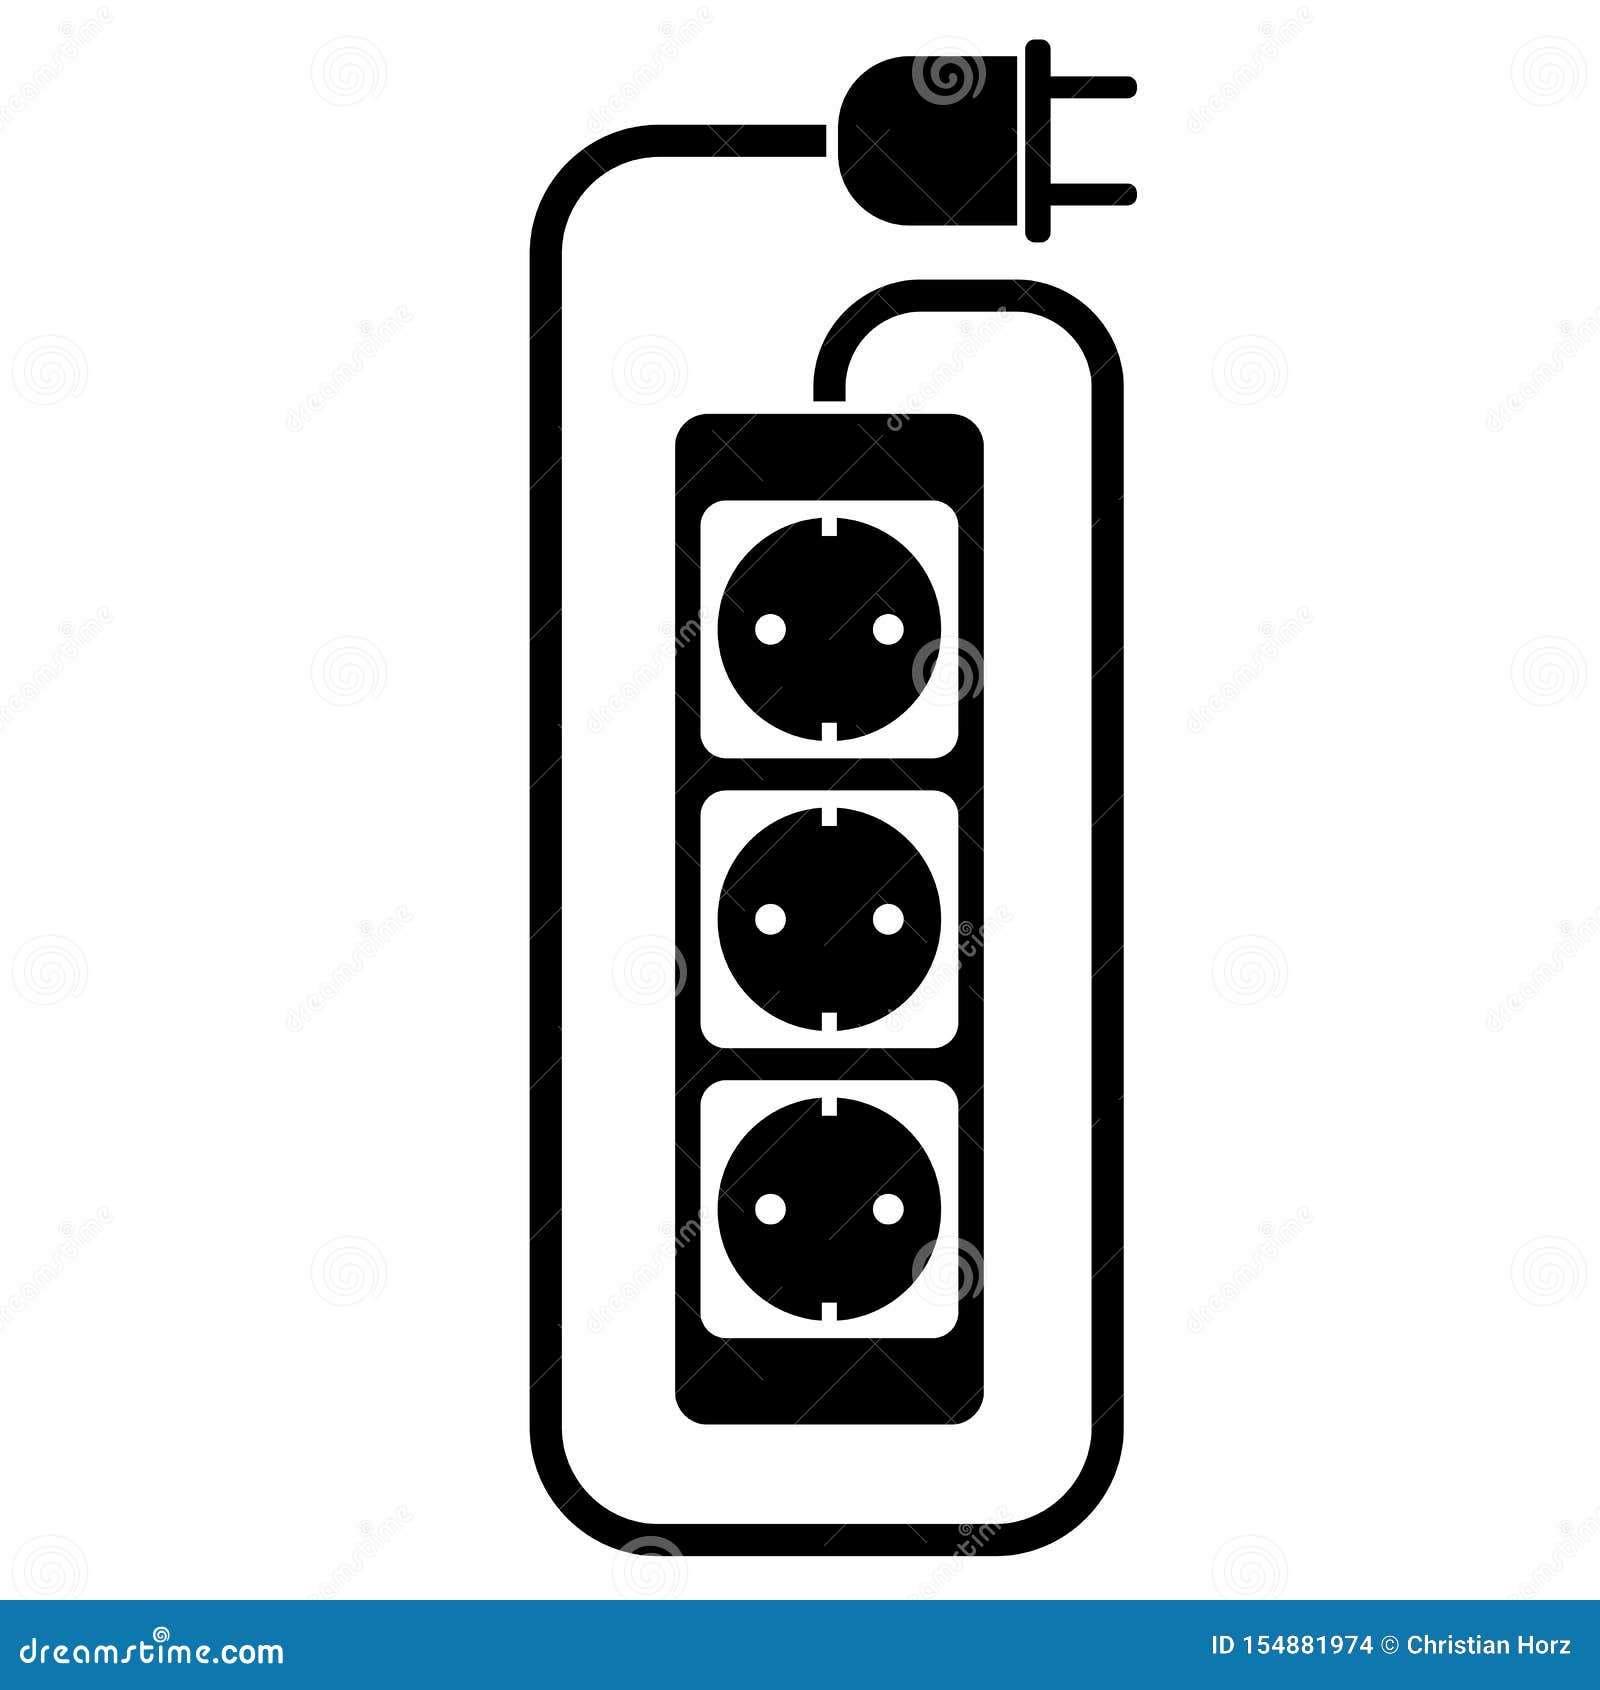 Electric Extension Cord Or Extension Cable Icon With Power